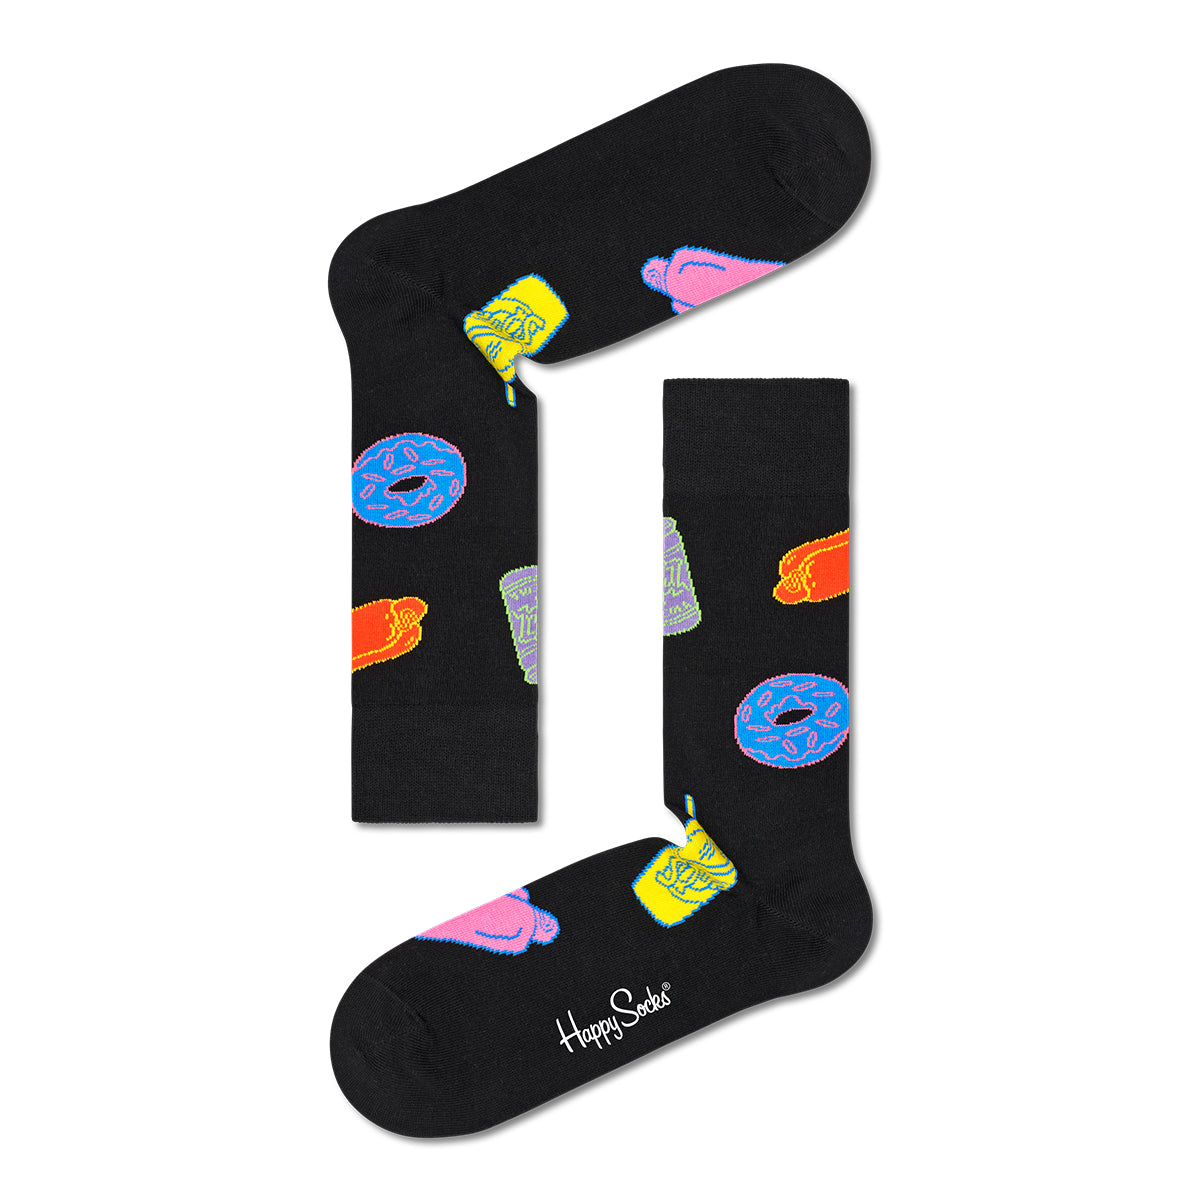 The Simpsons All You Can Eat Sock (9300)